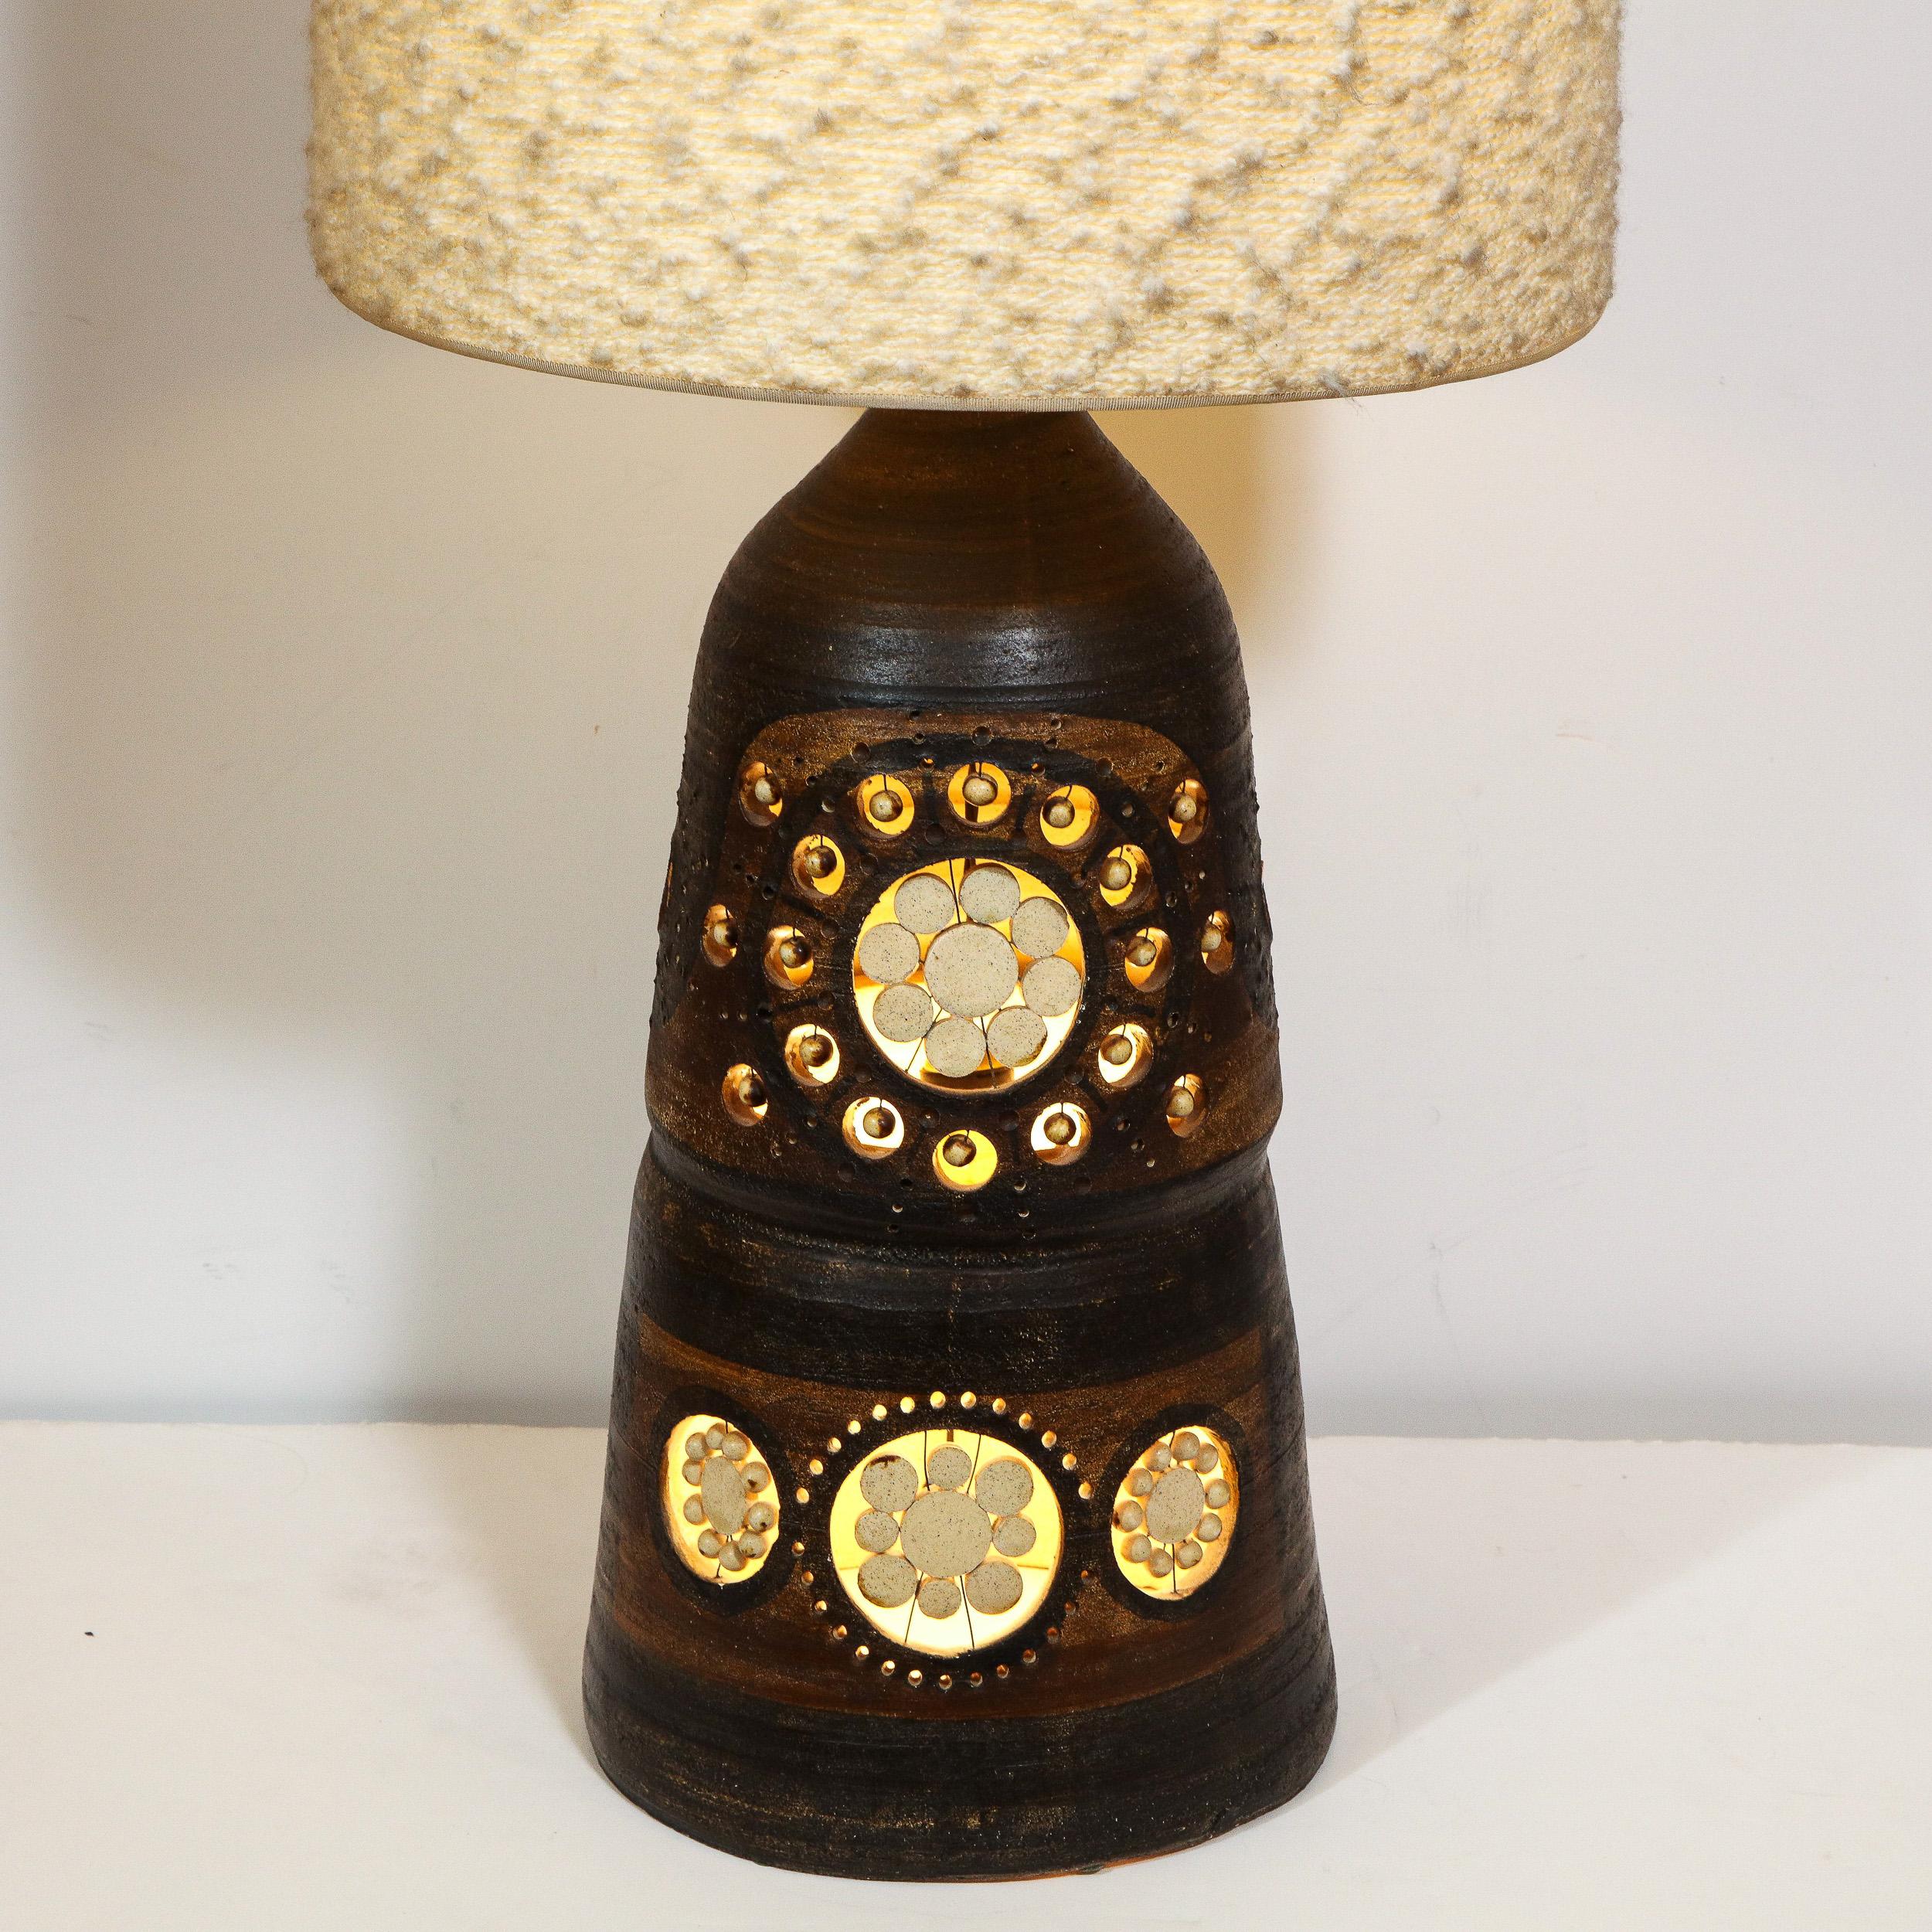 This sophisticated Mid-Century Modern table lamp was realized by the acclaimed designed Georges Pelletier in France, circa 1950. It features a conical ceramic body hand painted in a rich espresso hue with chestnut accents throughout and circular cut